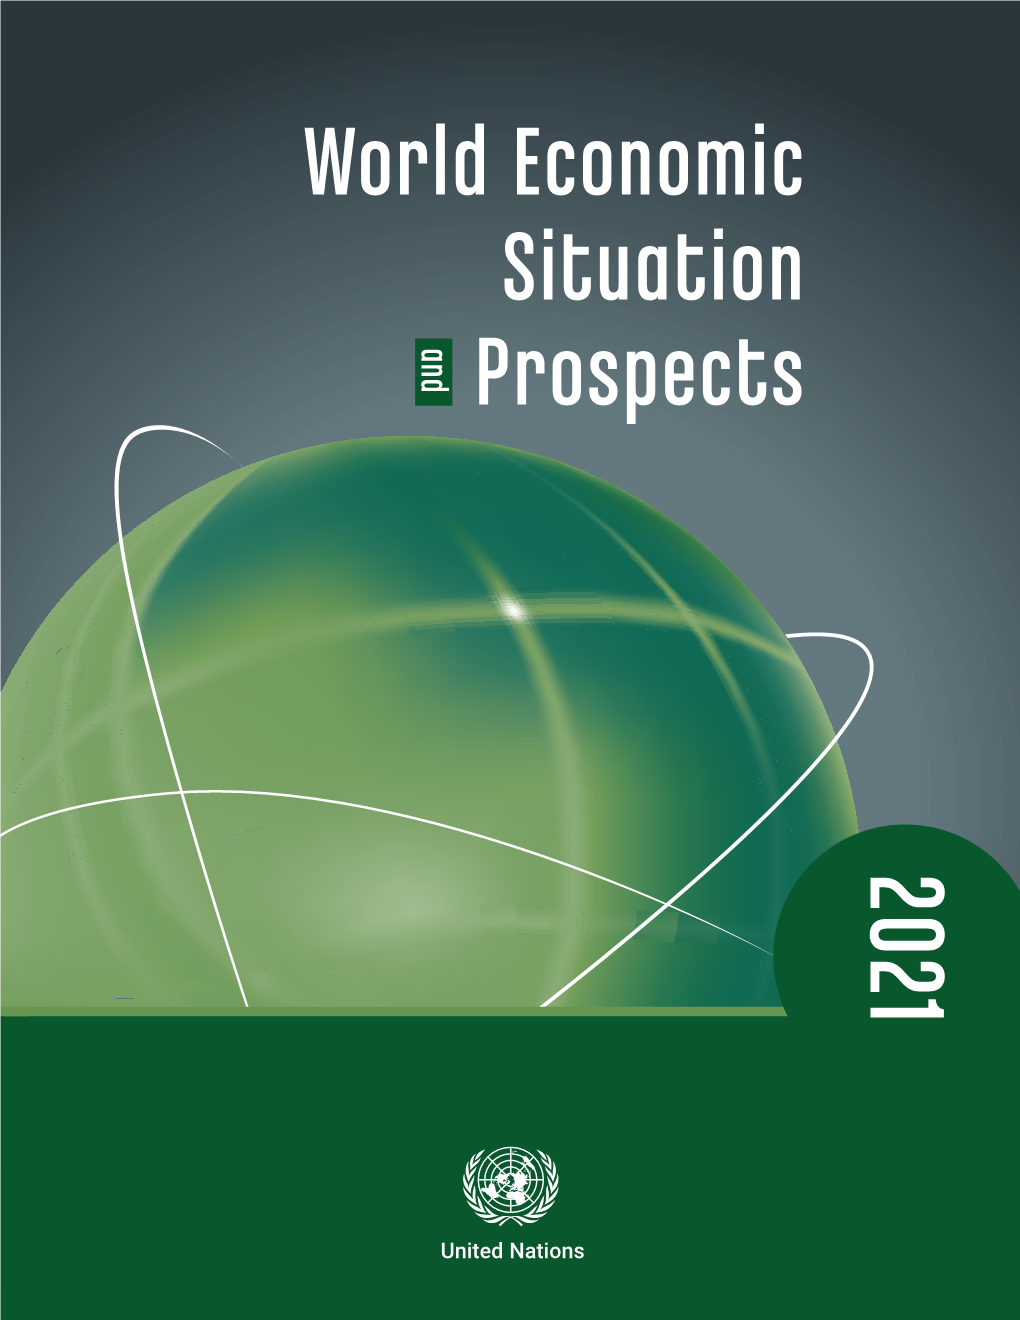 World Economic Situation and Prospects 2021: East Asia